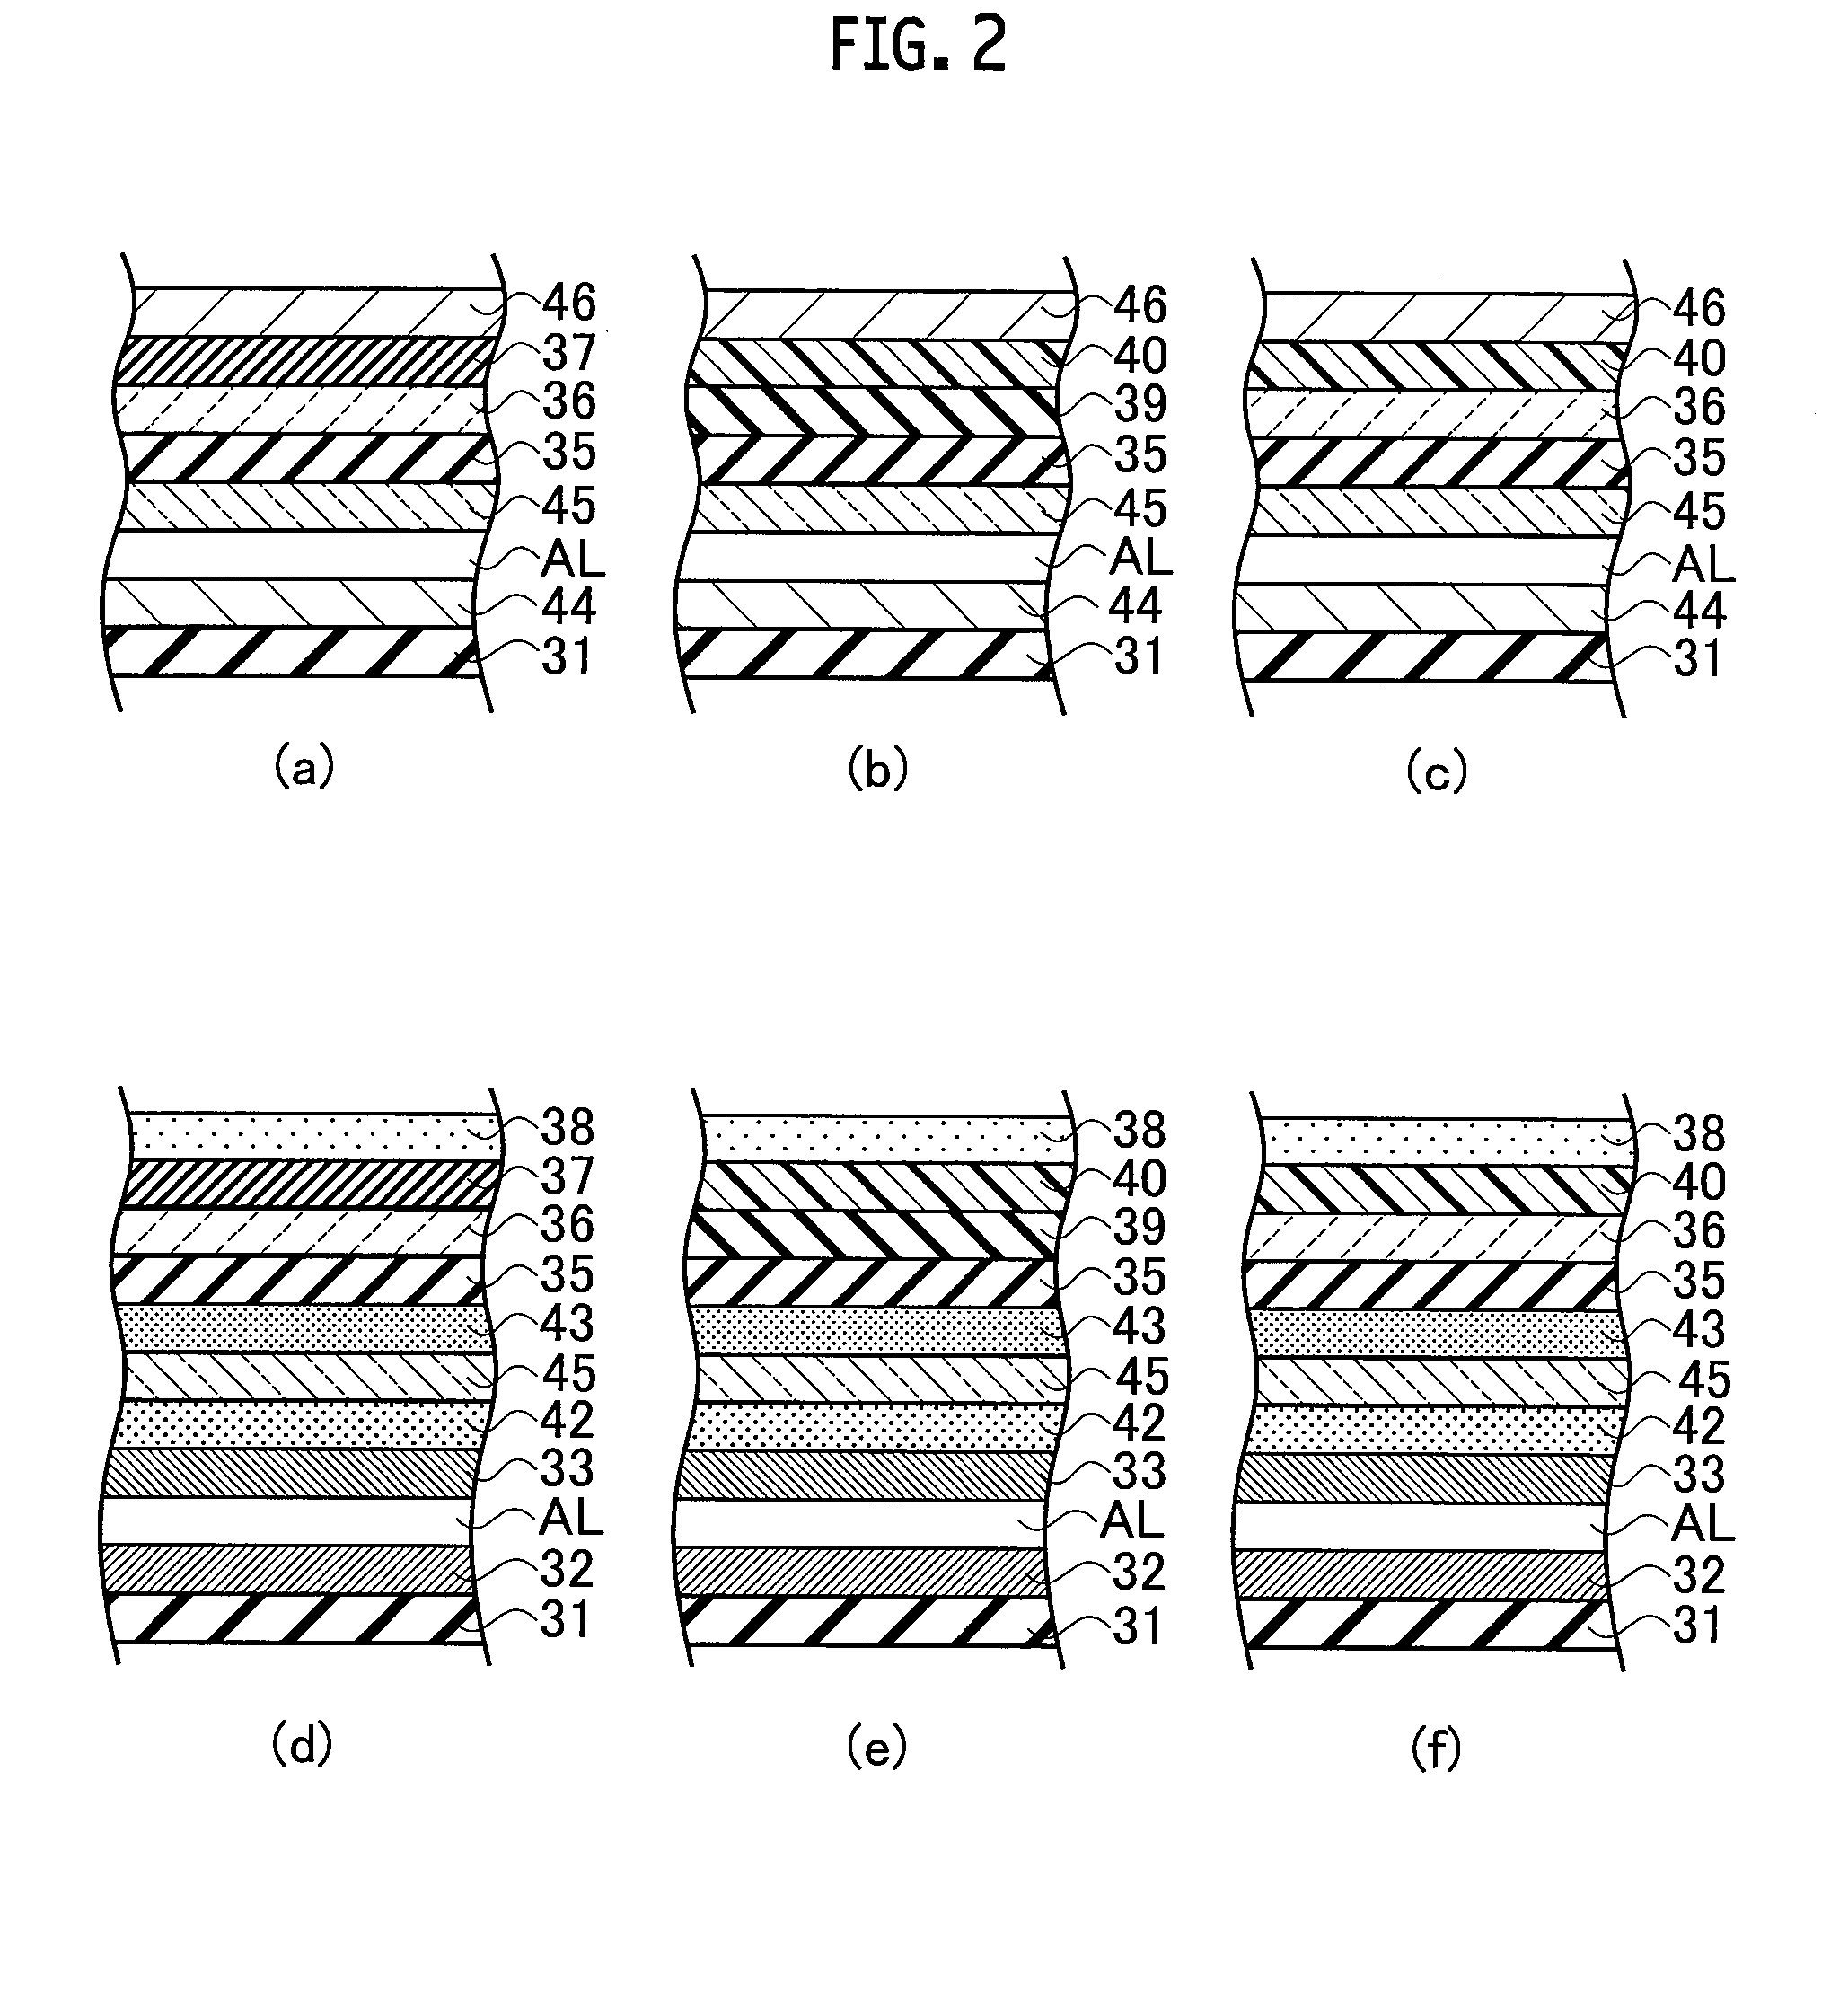 Display apparatus, automotive display apparatus, and method for manufacturing the display apparatus